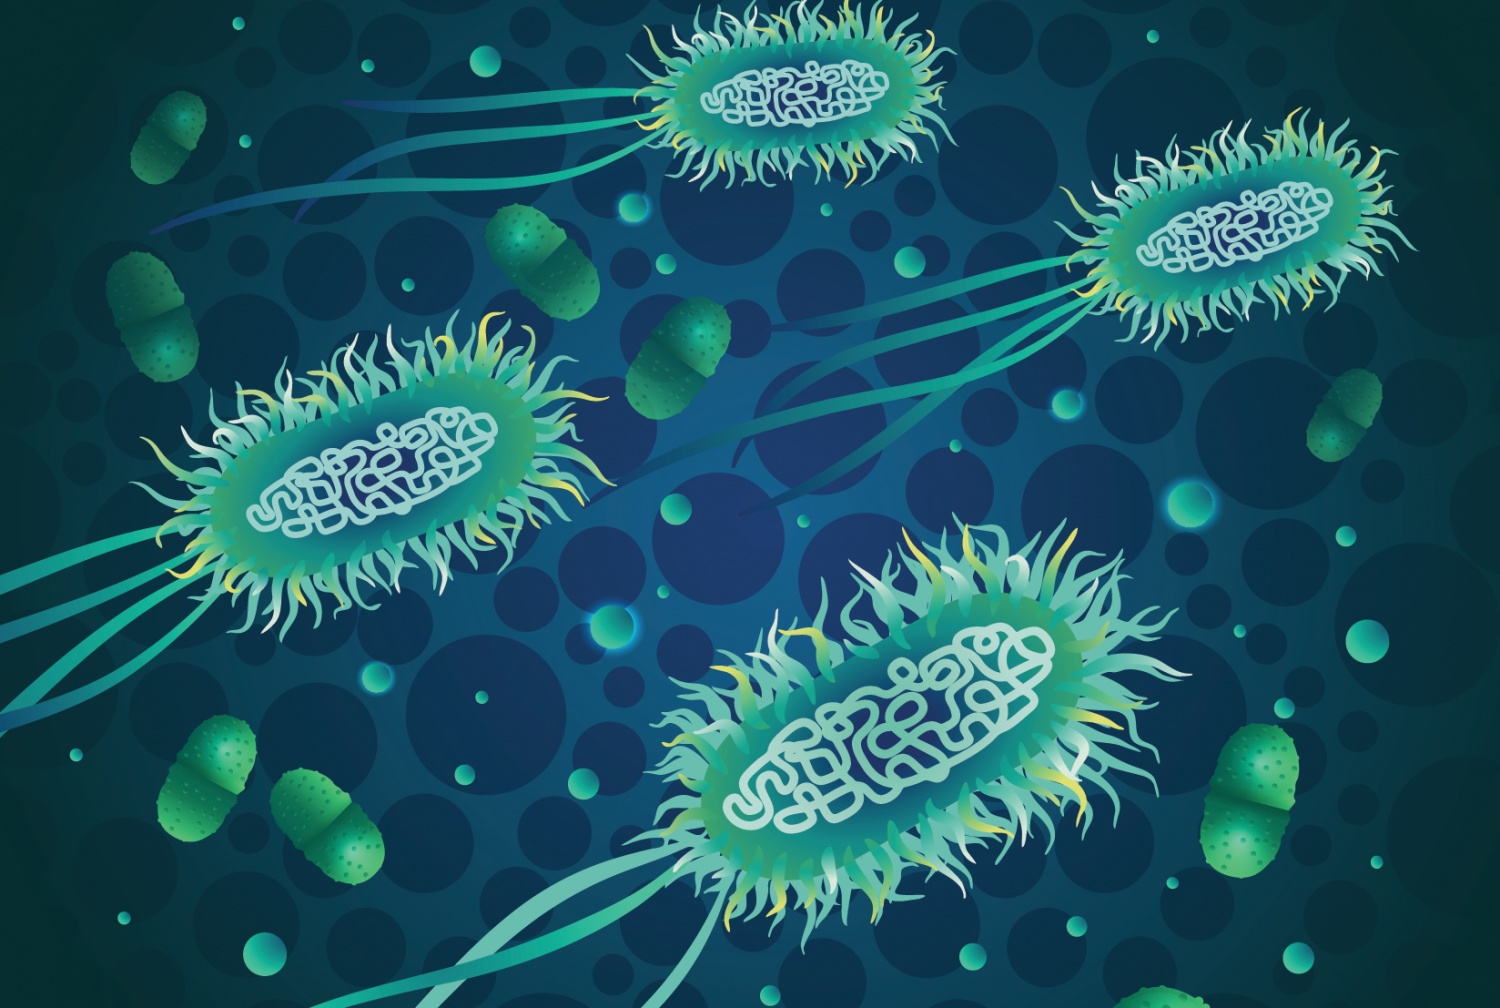 Blue and green illustration of e coli bacterium